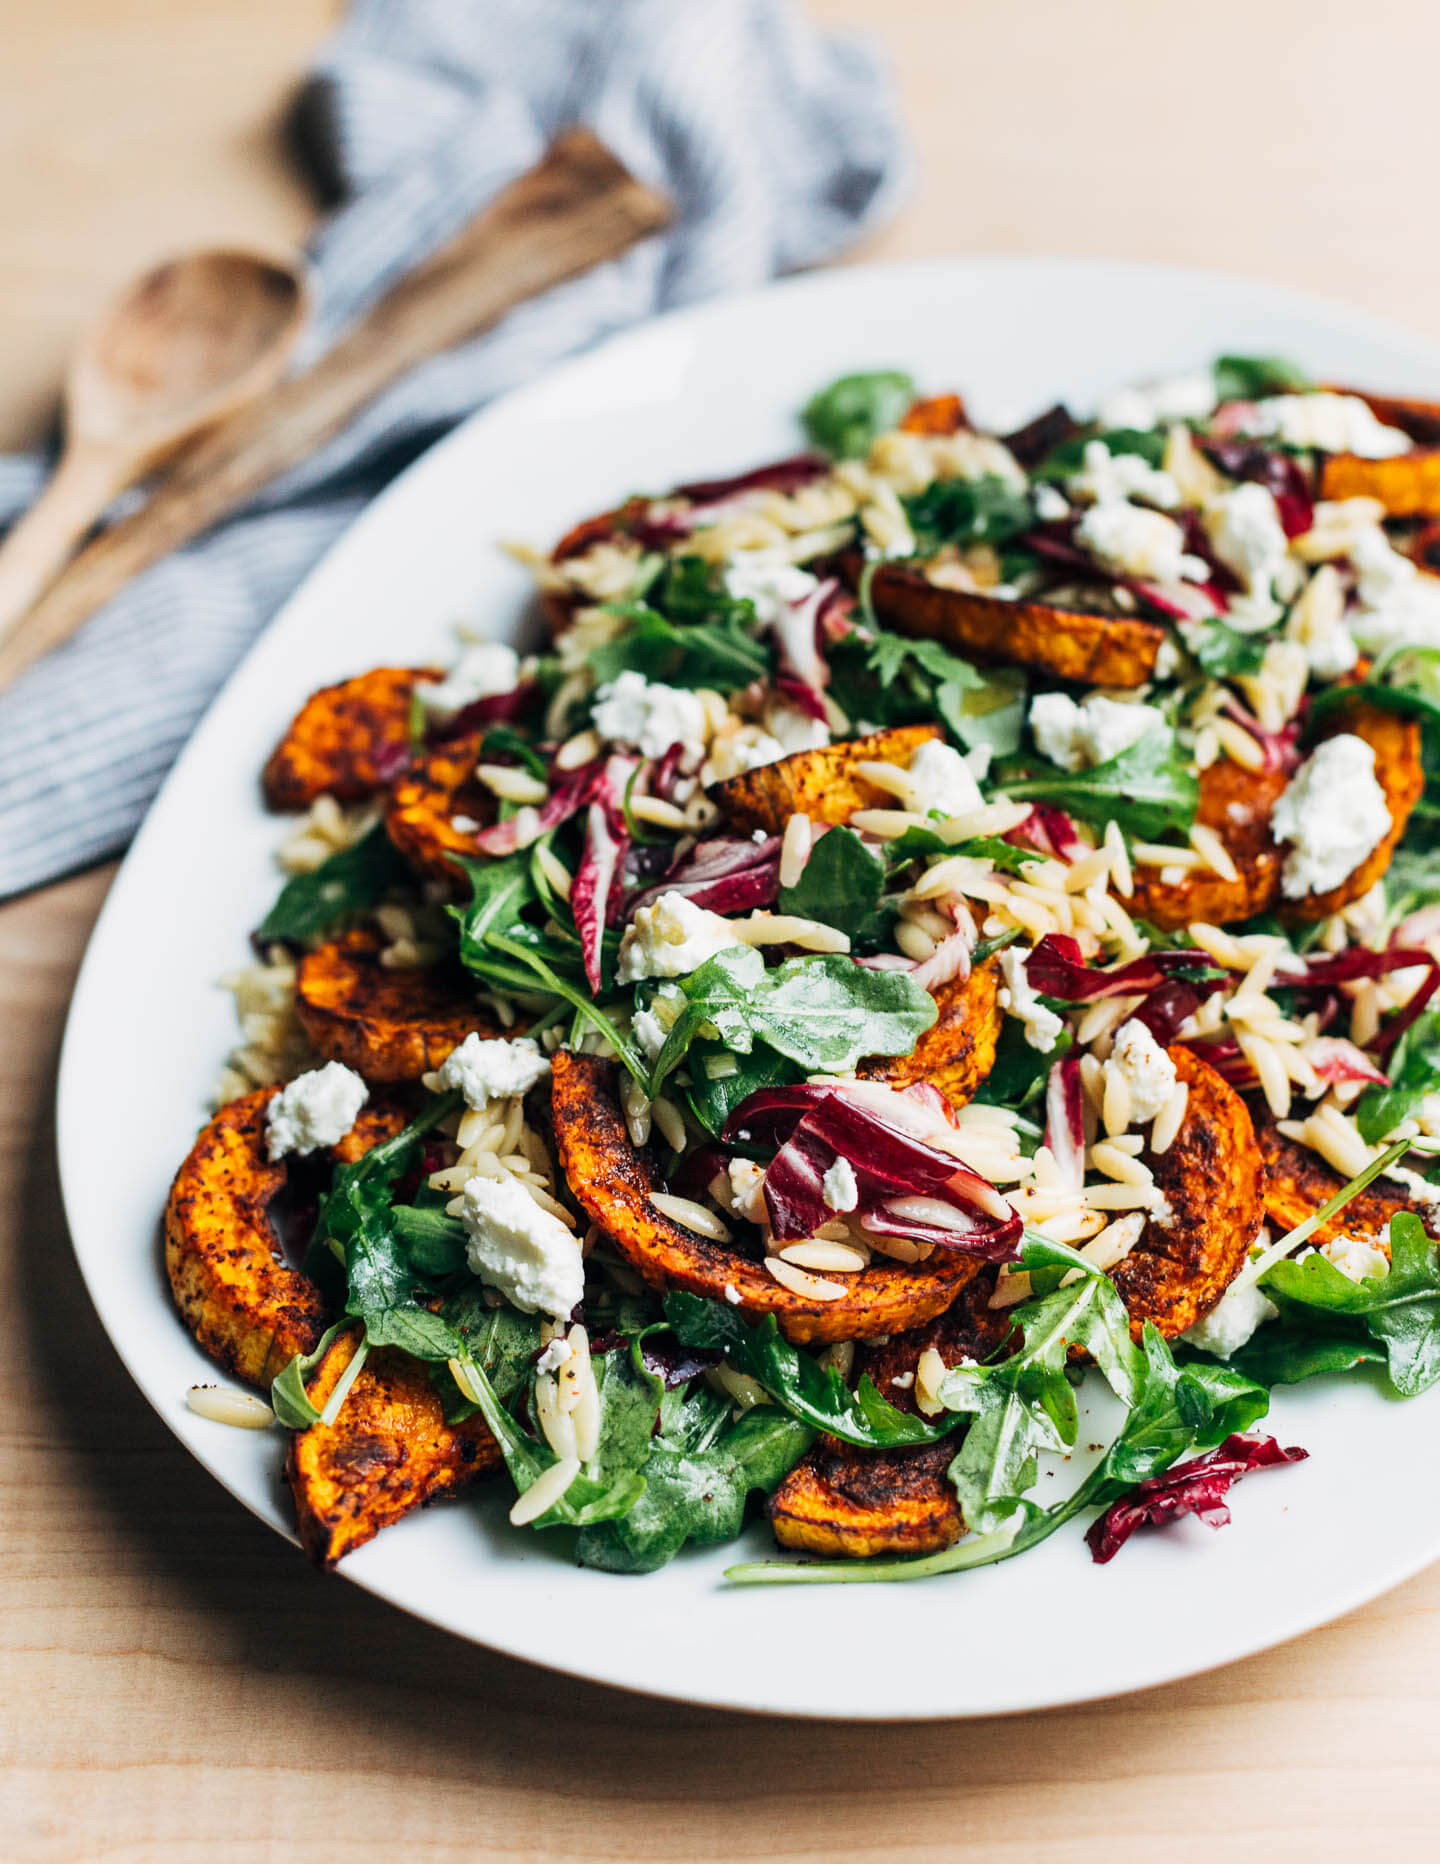 This roasted butternut squash and orzo salad with sturdy fall greens and crumbled goat cheese is beautiful, delicious, and perfectly autumnal.